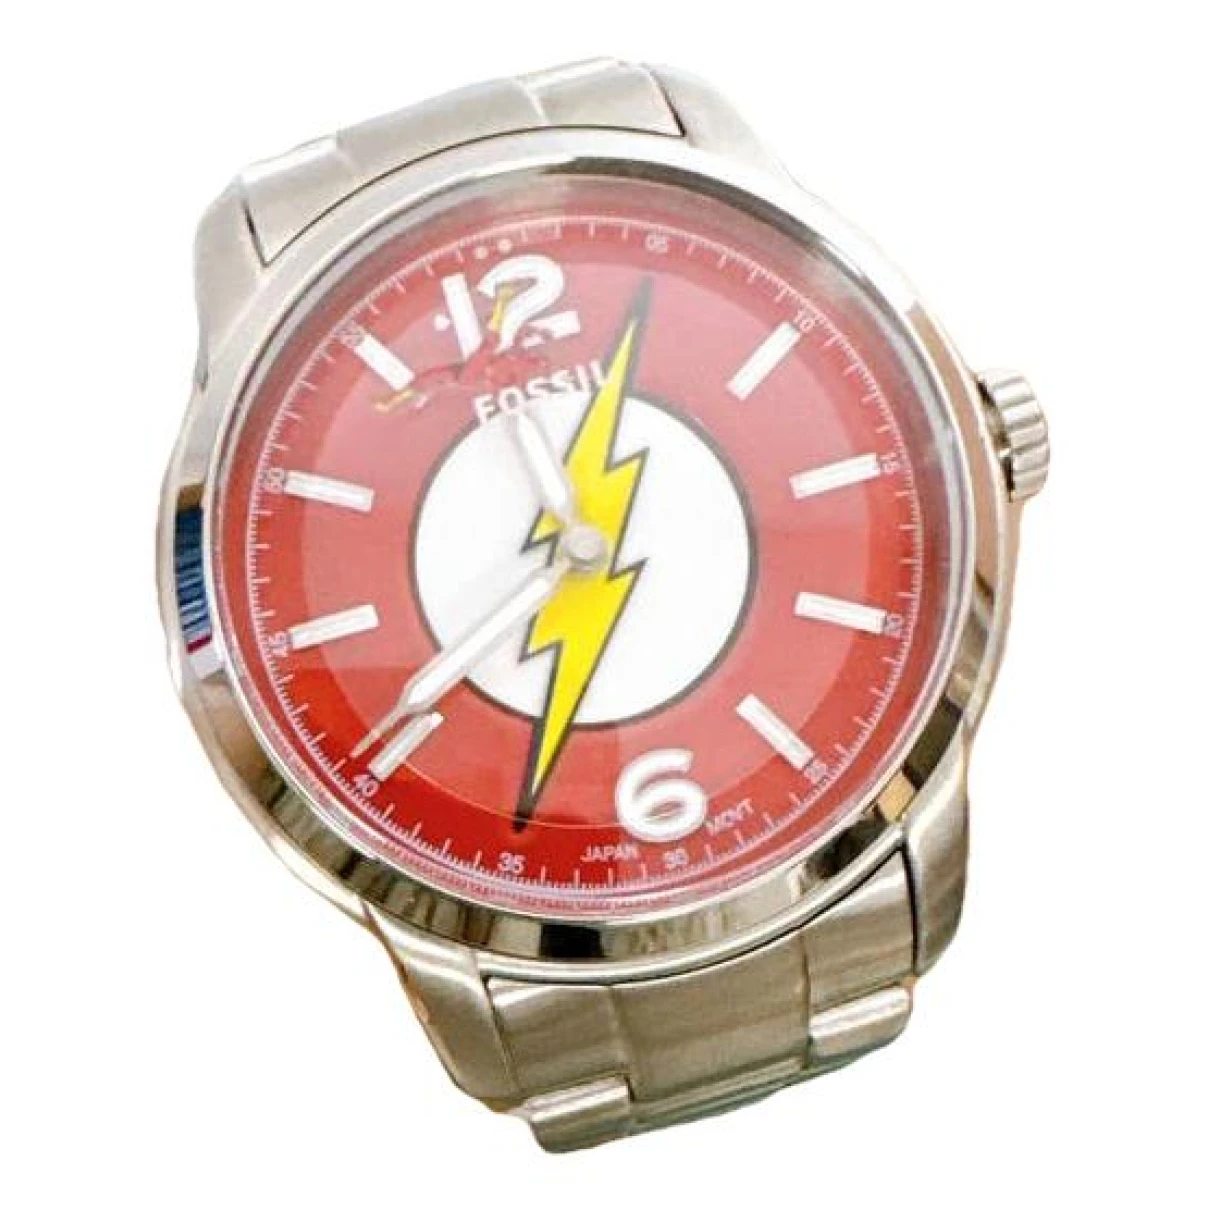 Pre-owned Fossil Watch In Red